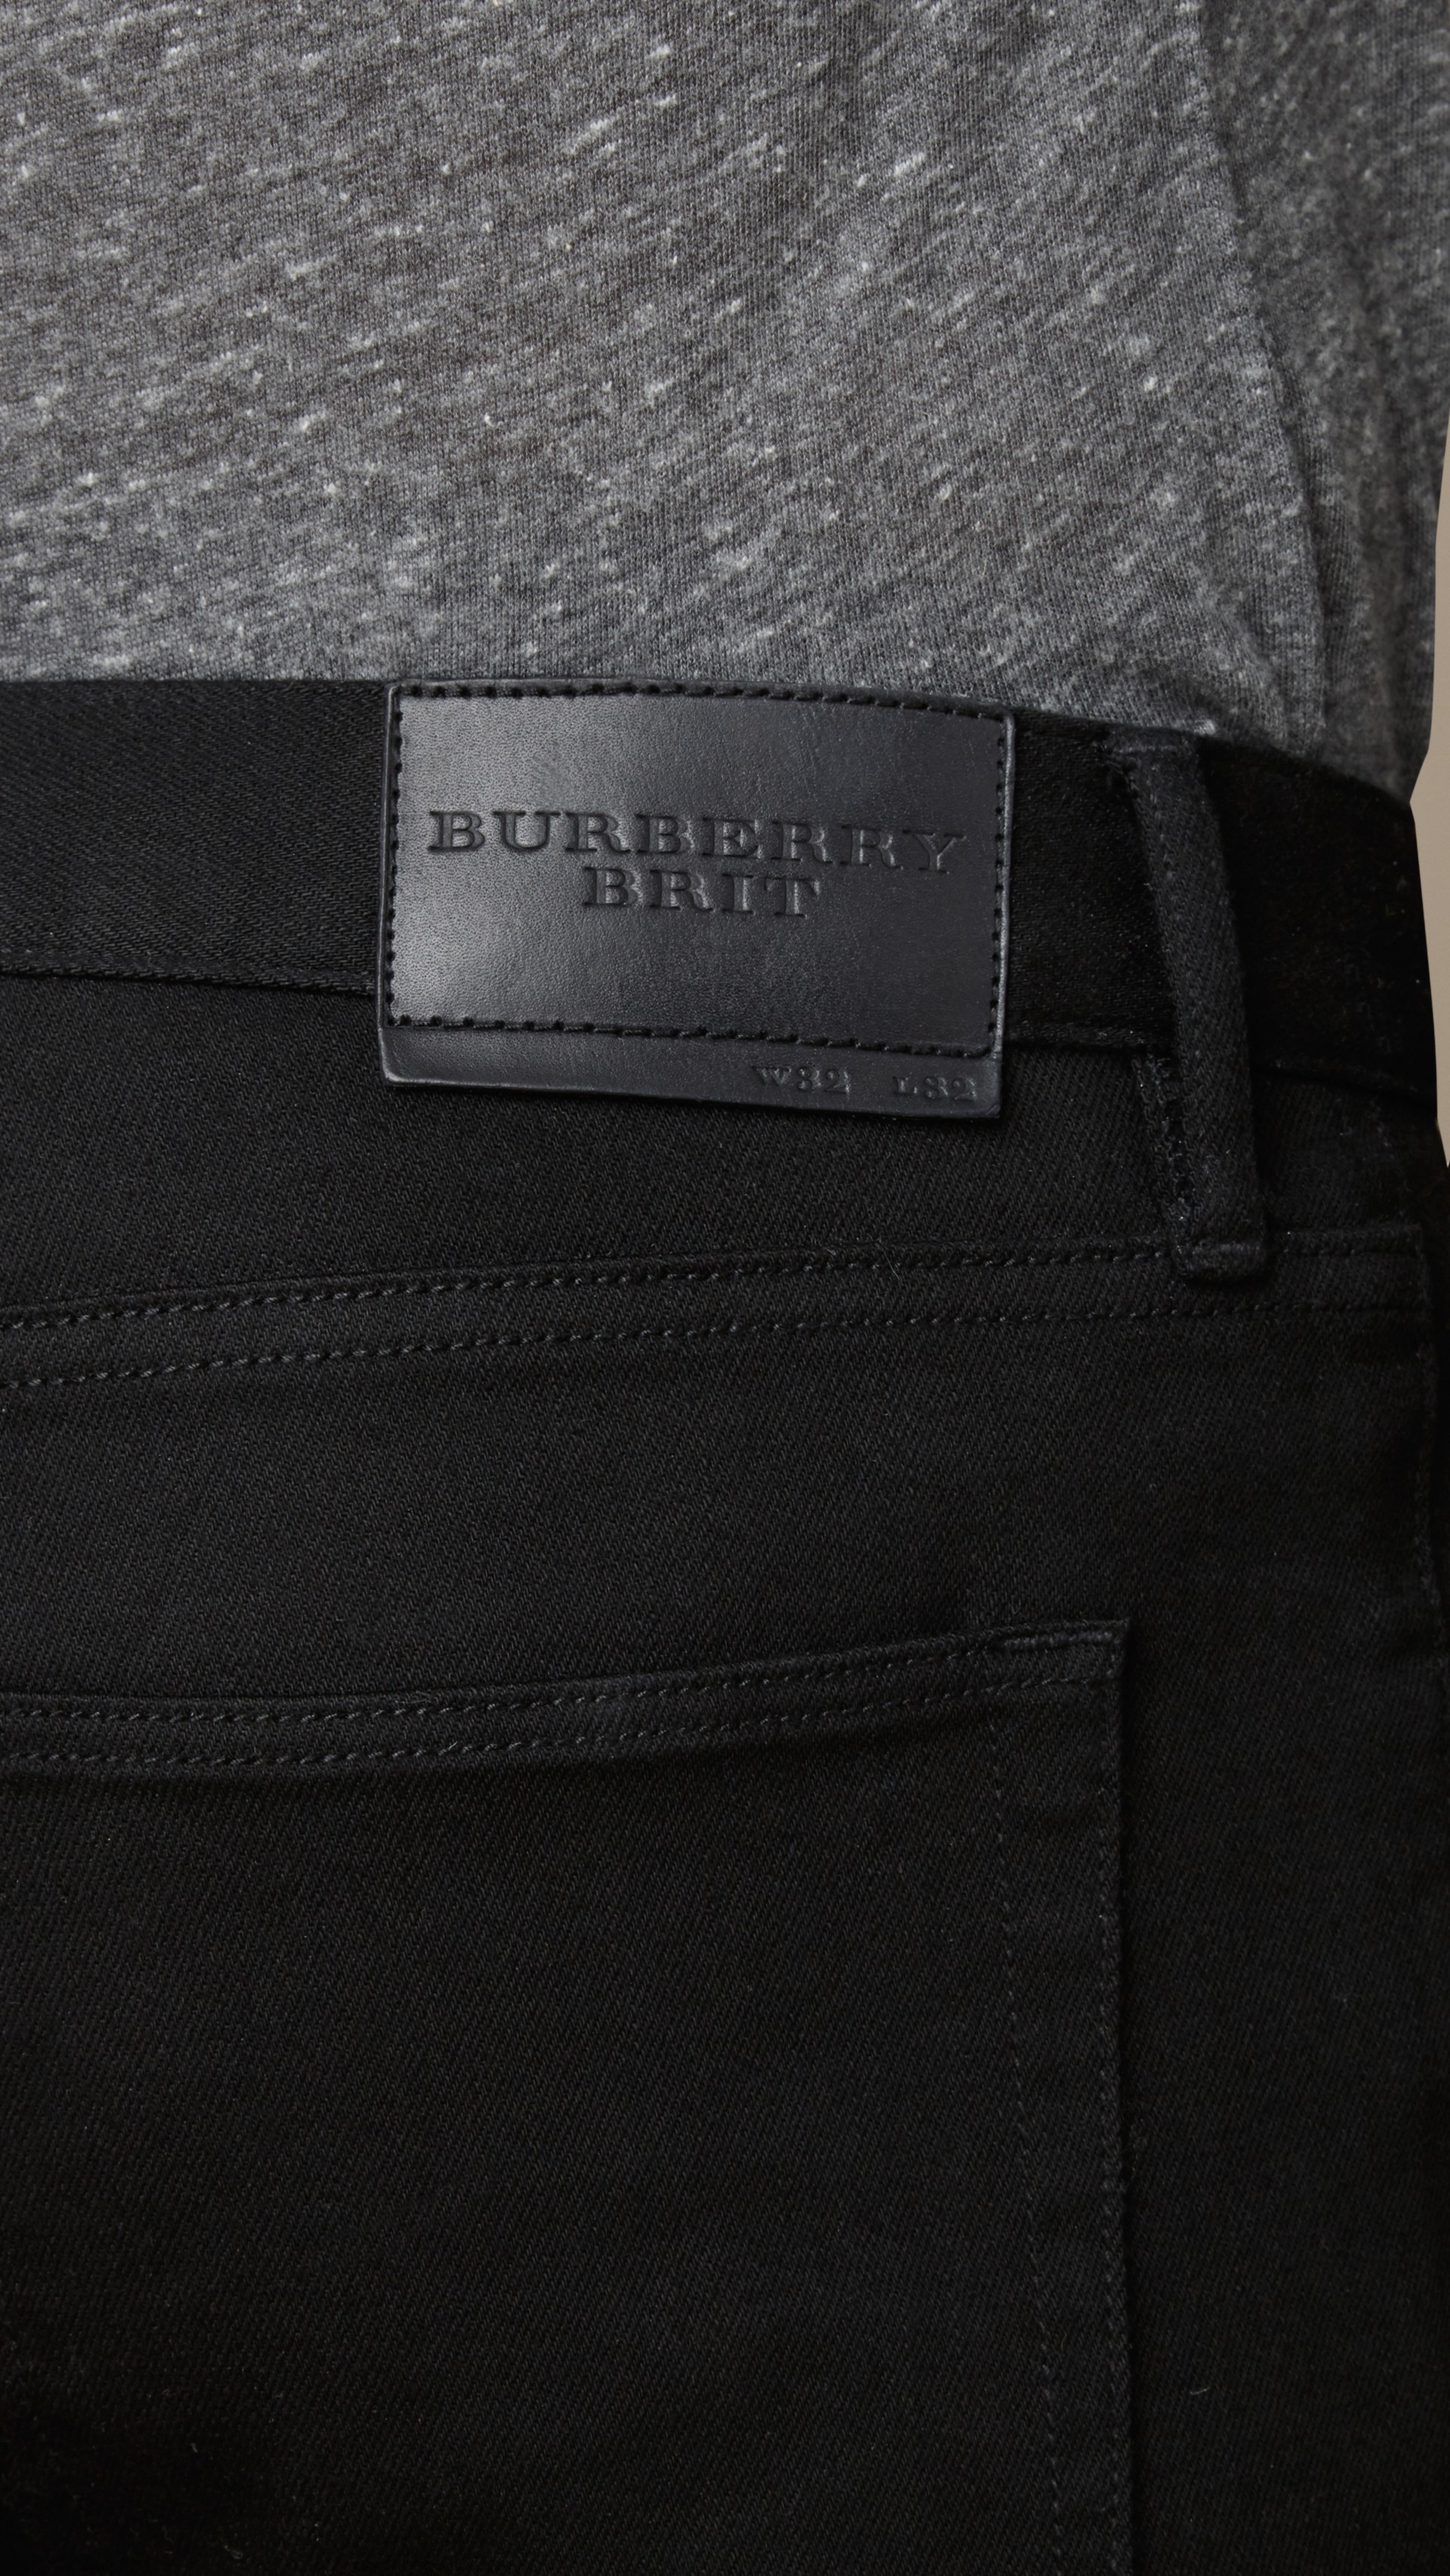 Straight Fit Yarn Dyed Jeans in Black - Men | Burberry United States